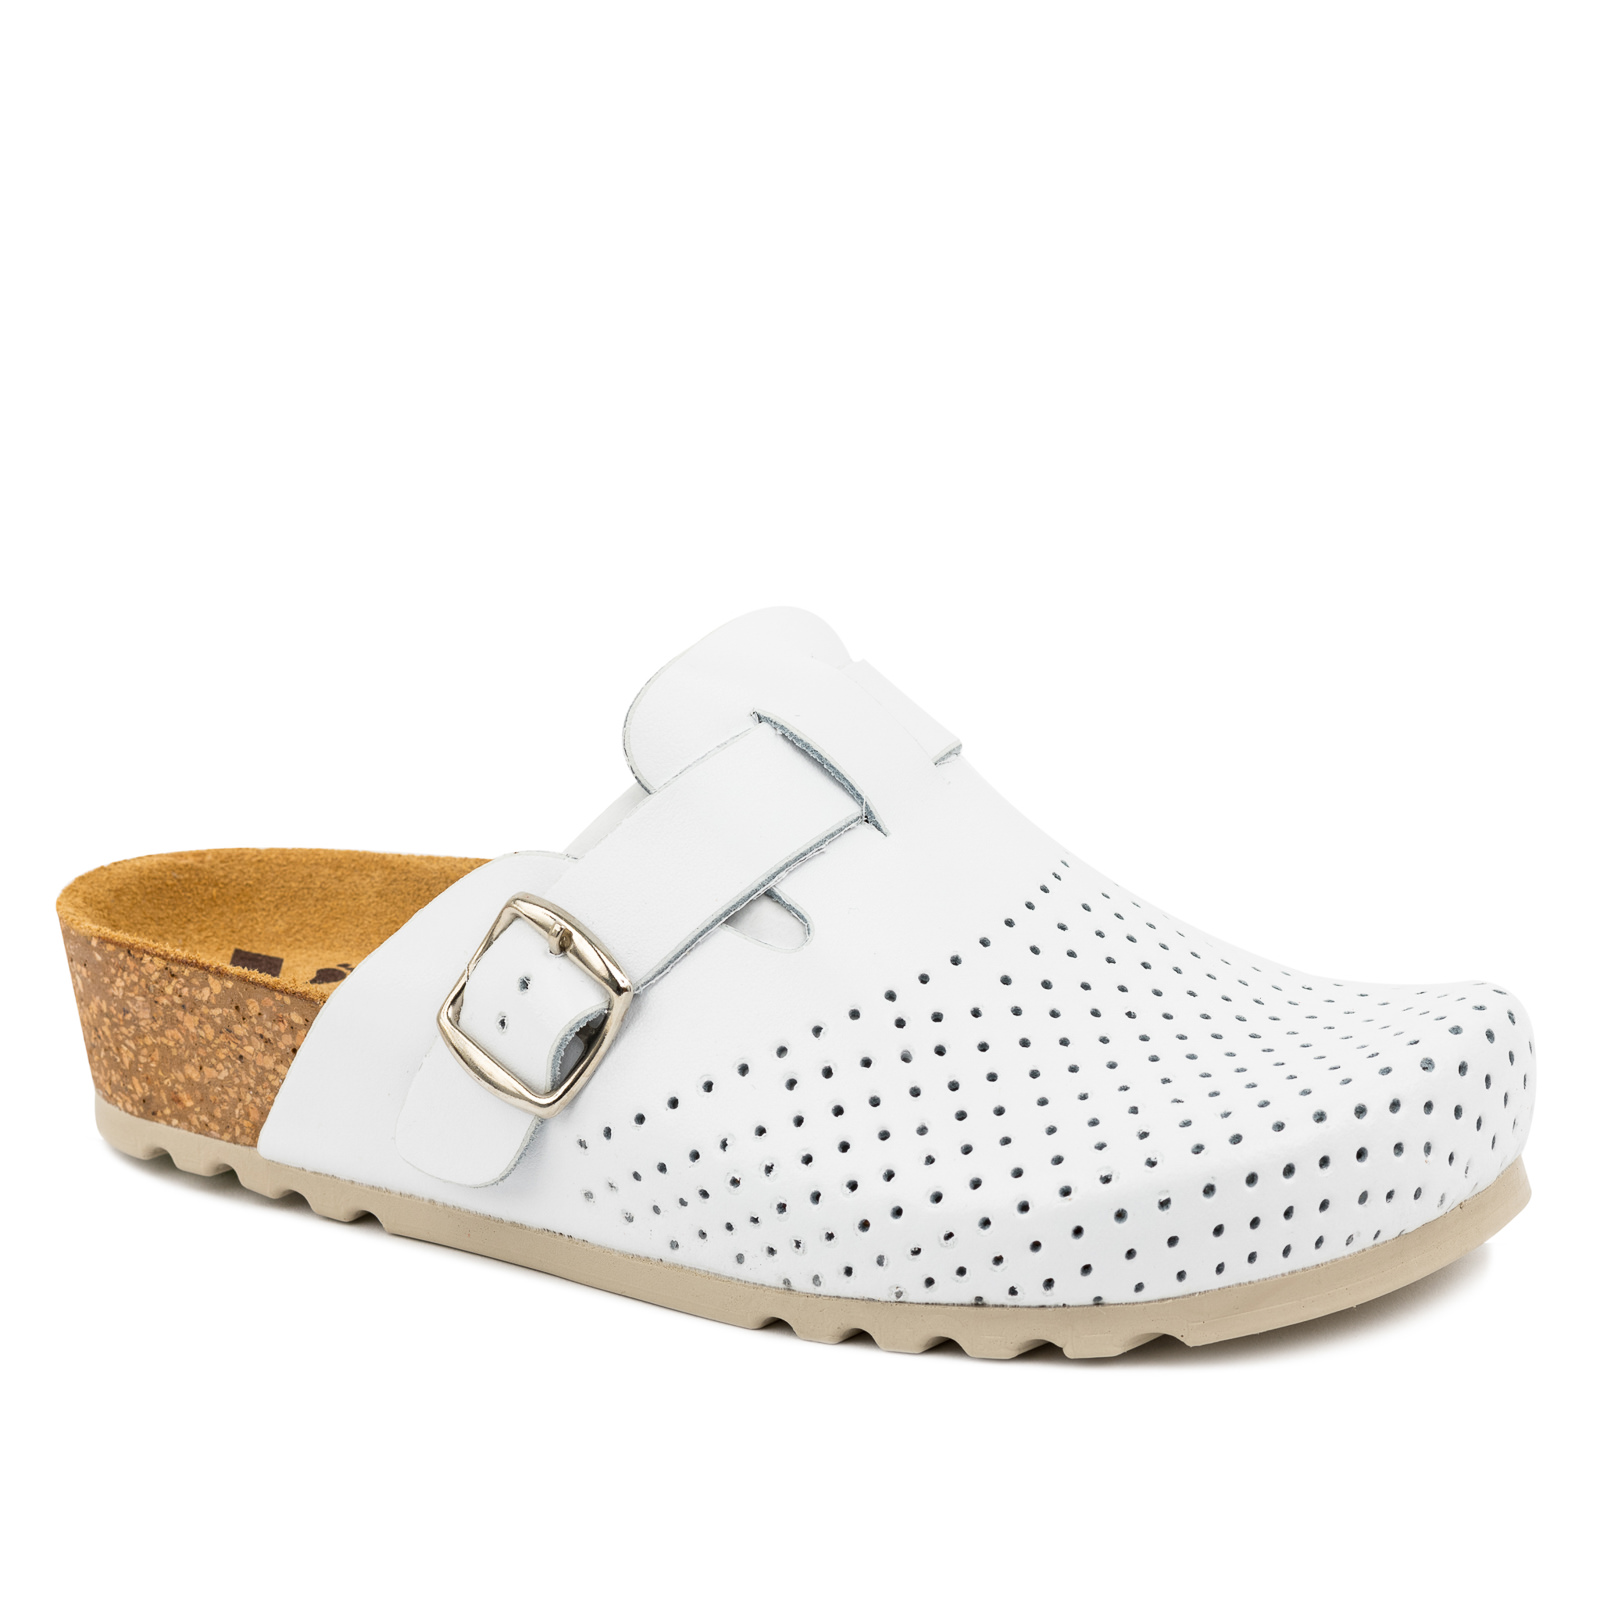 LEATHER ANATOMIC CLOGS WITH BELT - WHITE